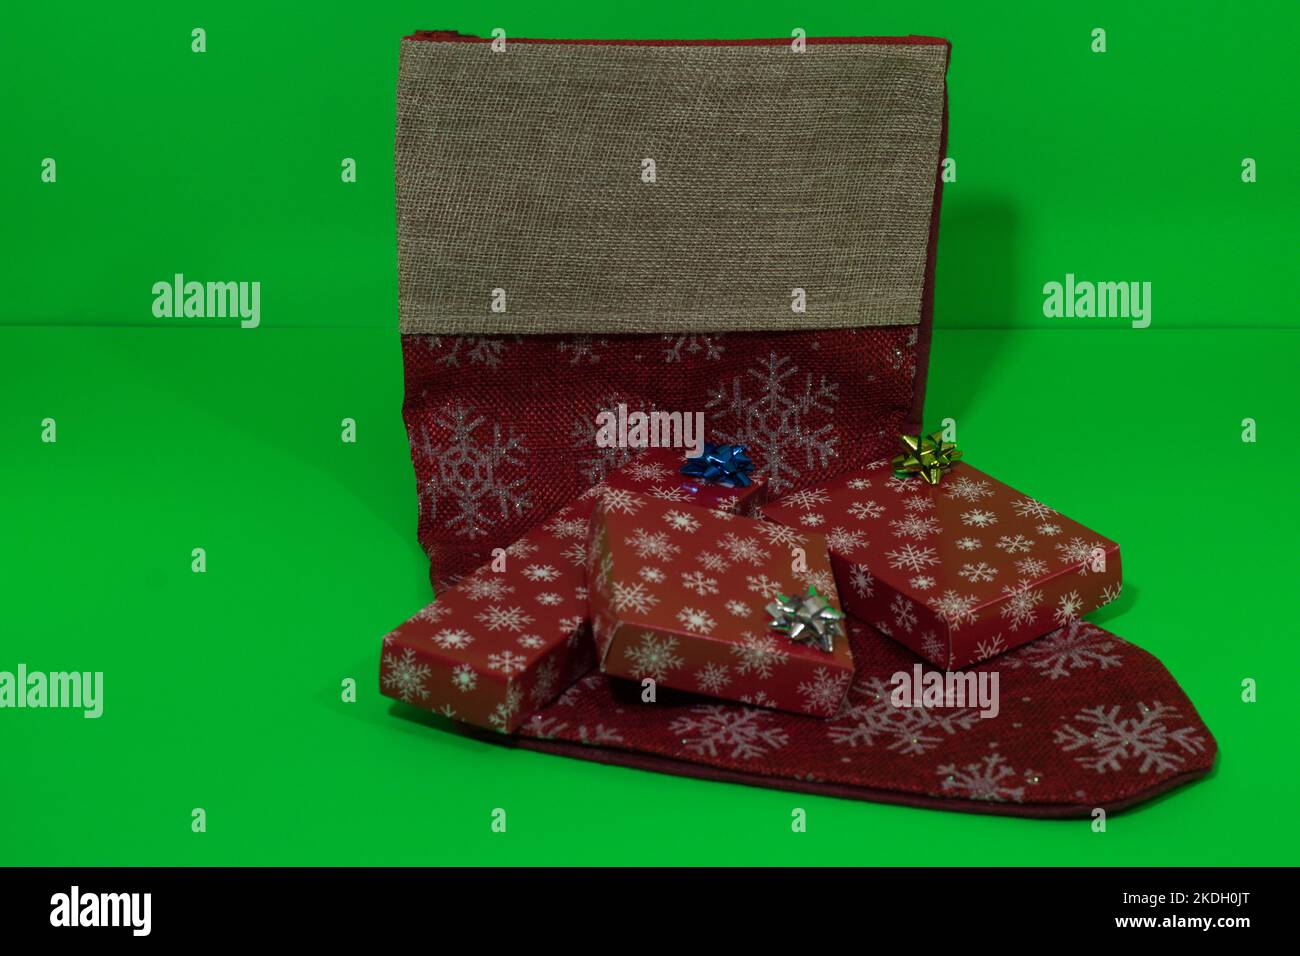 Christmas stocking filled with presents on a green background! Stock Photo